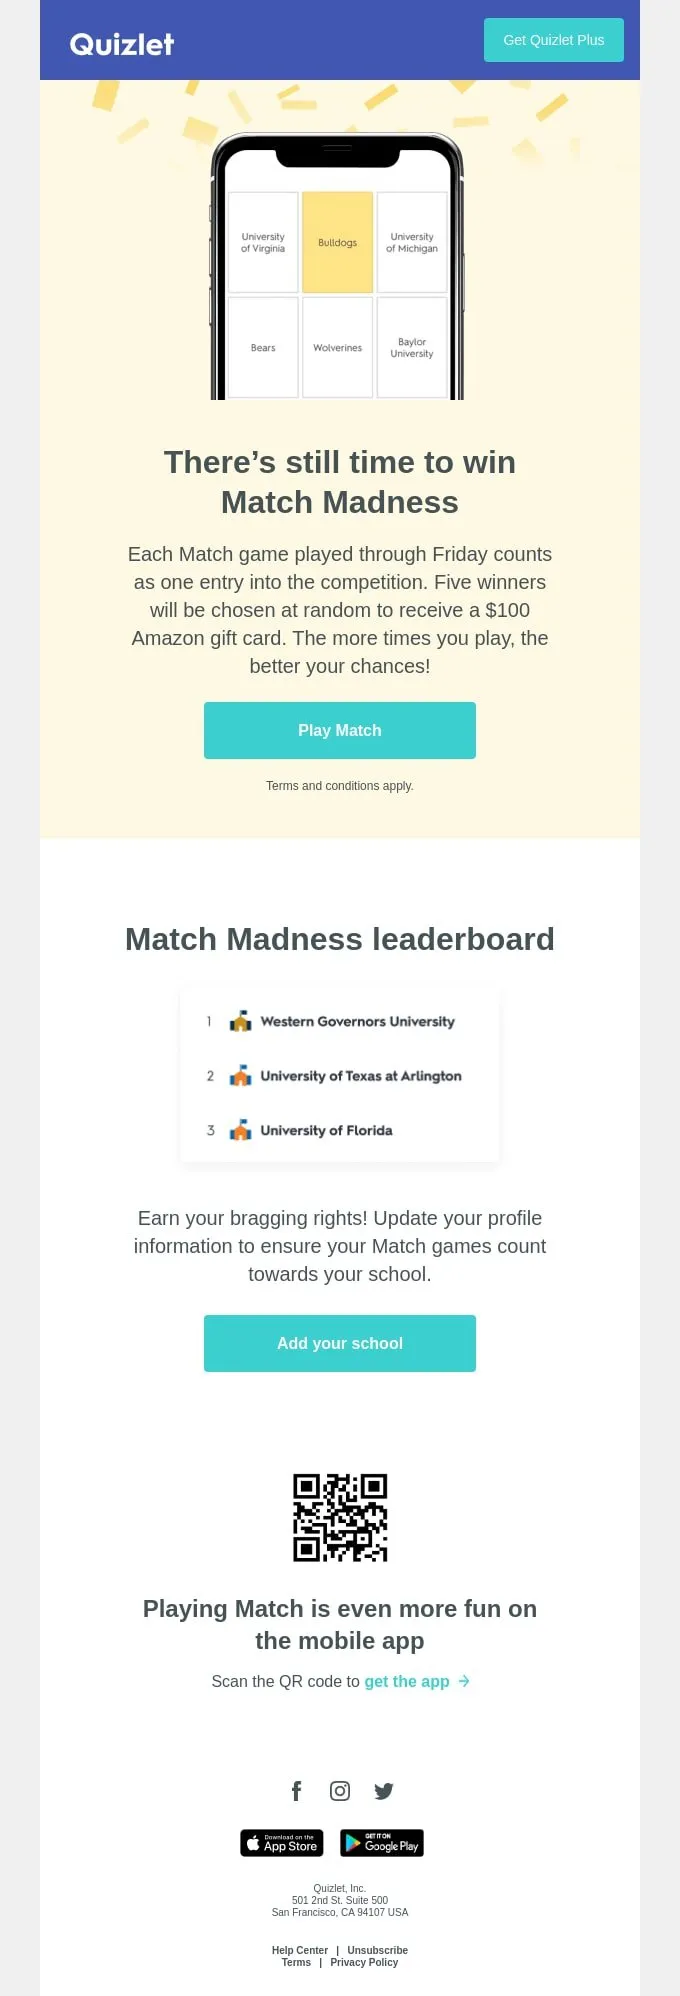 quizlet-march-madness-email